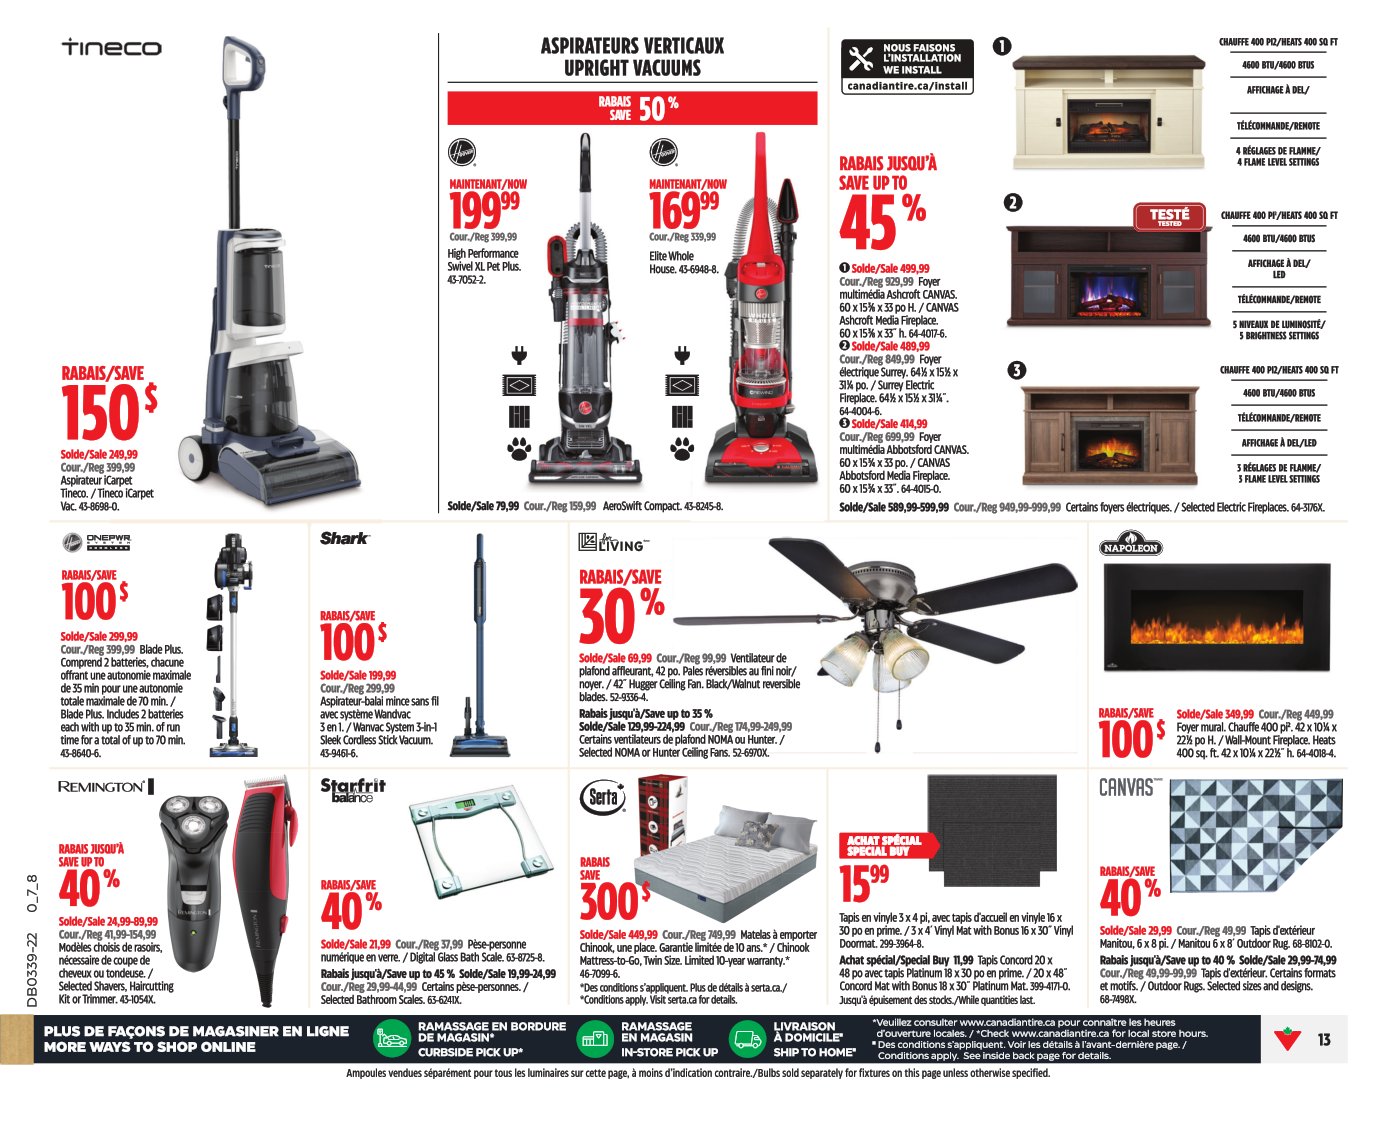 Circulaire Canadian Tire - Page 13